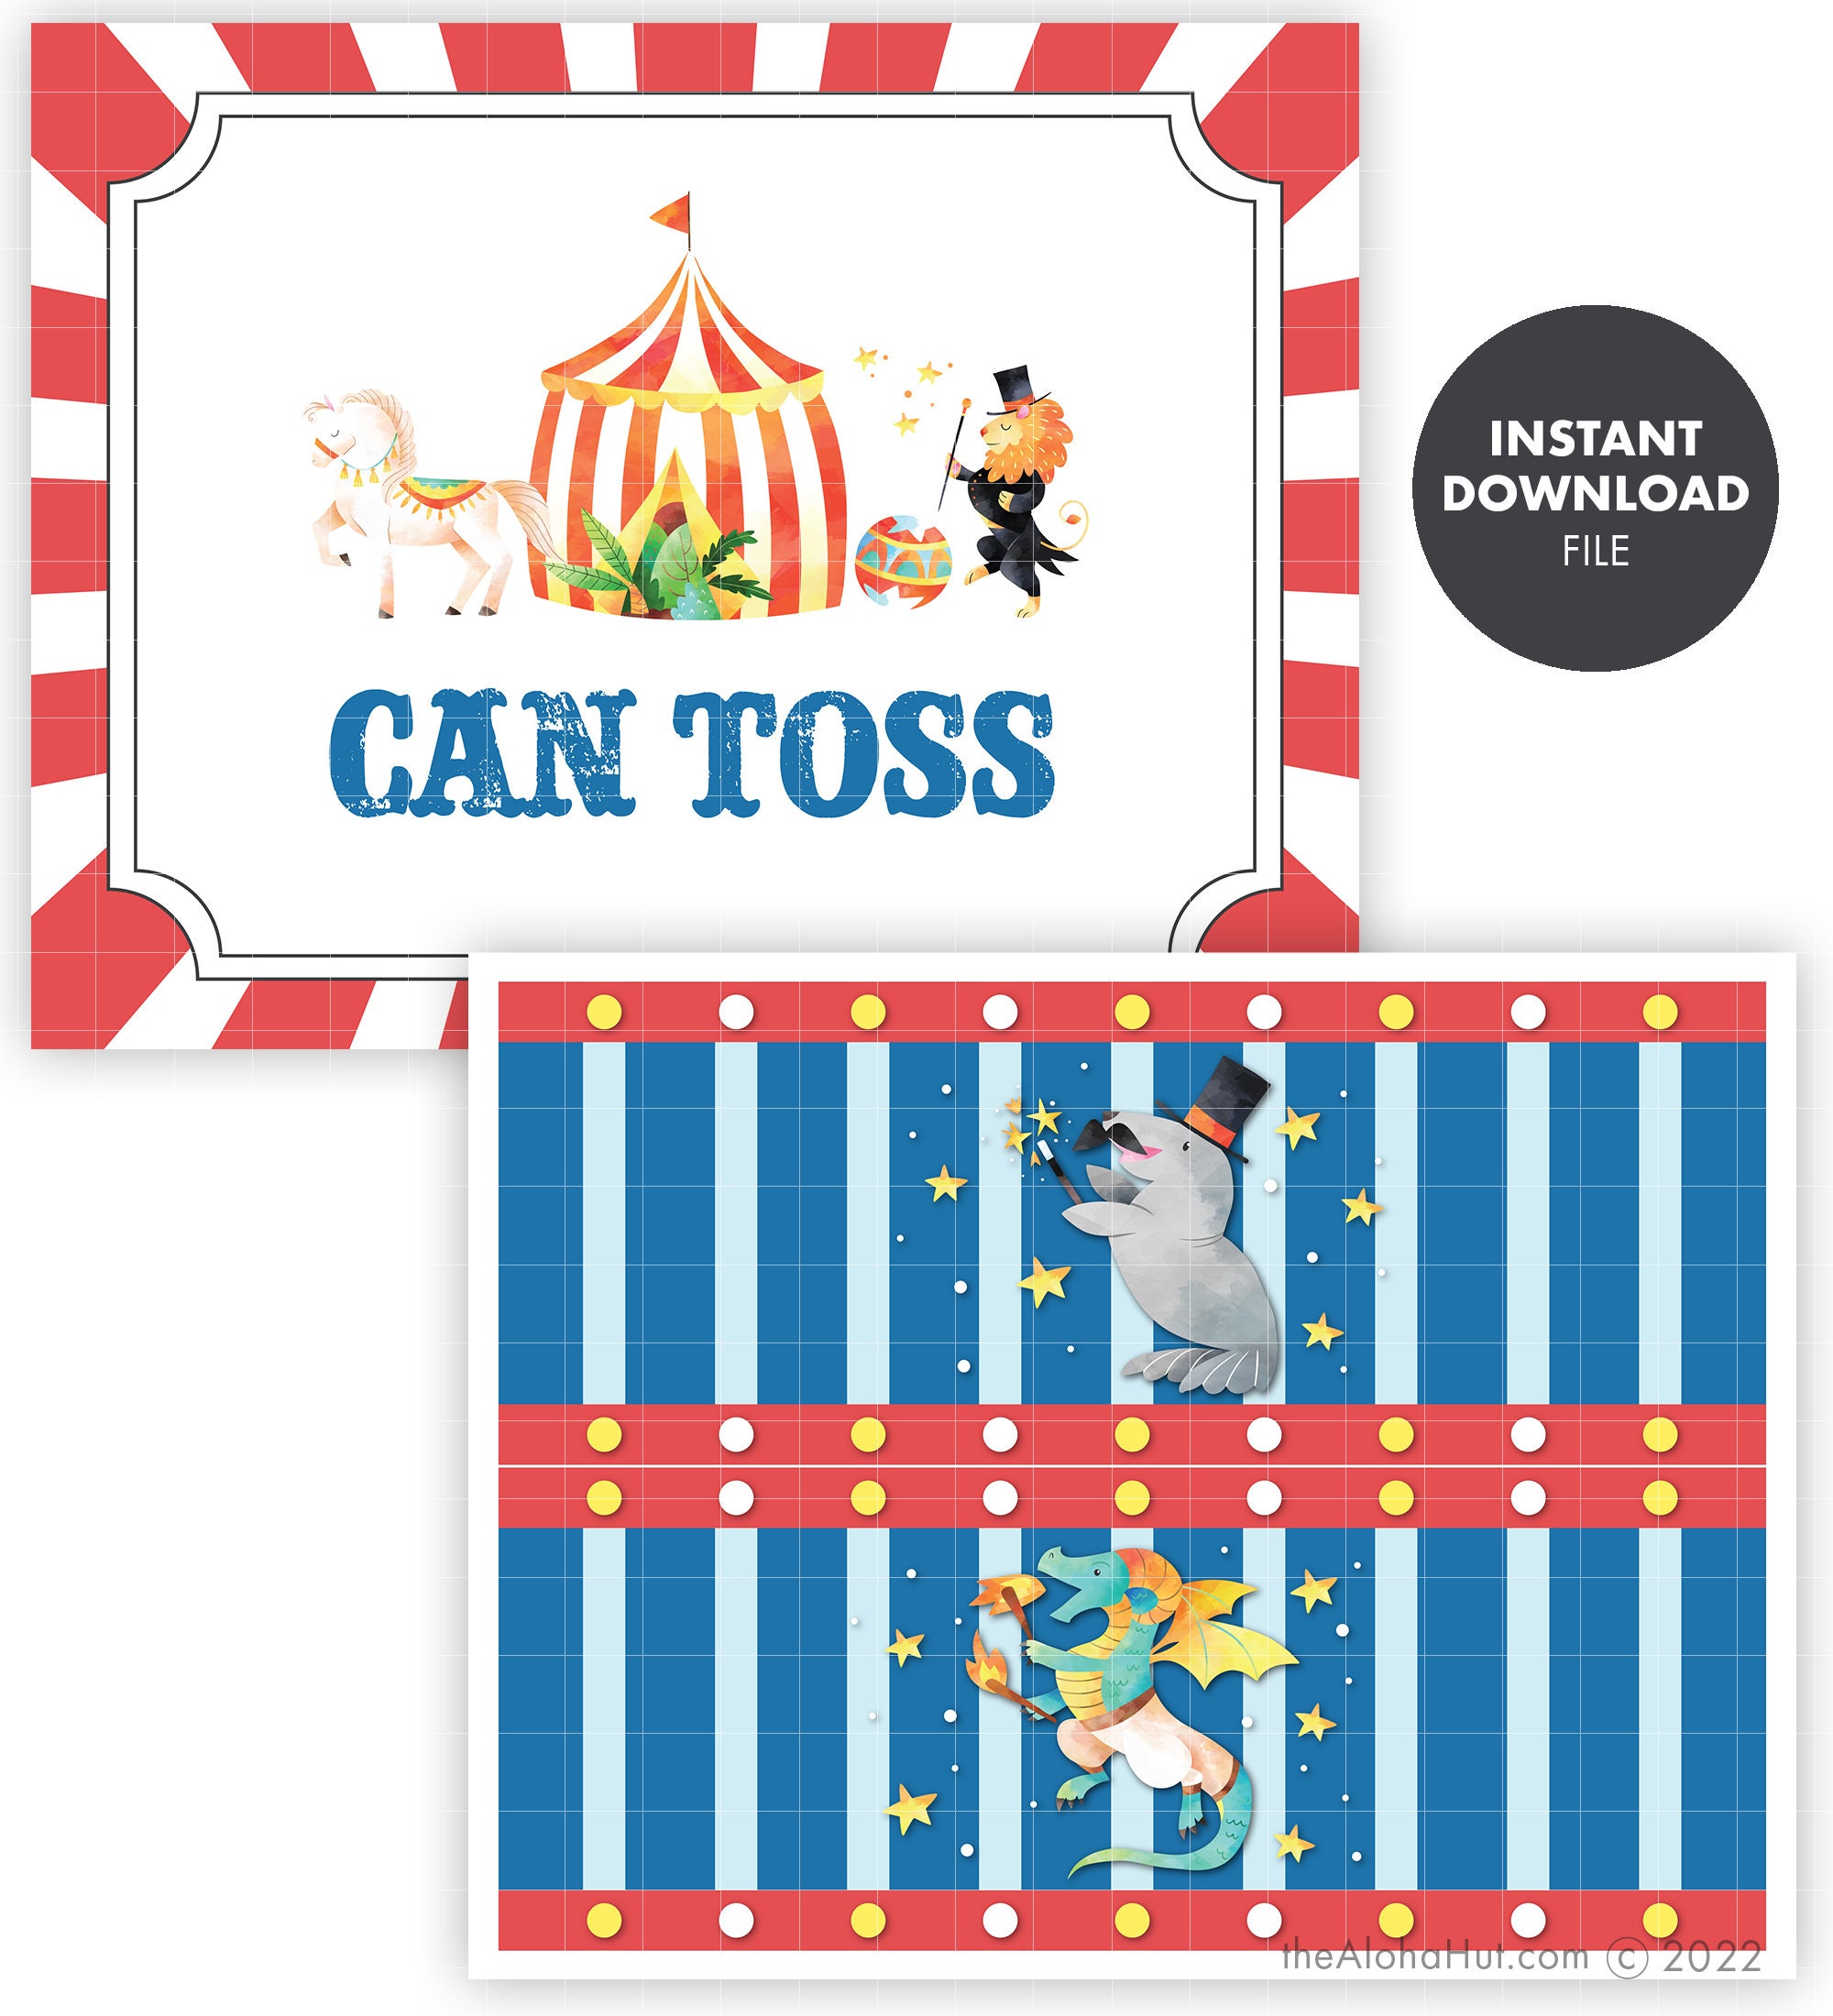 Circus Carnival Signs, Vintage Circus Party Signs, Circus Birthday Party  Printables, Circus Signs A3 Size PDF Files, Instant Download RPS3